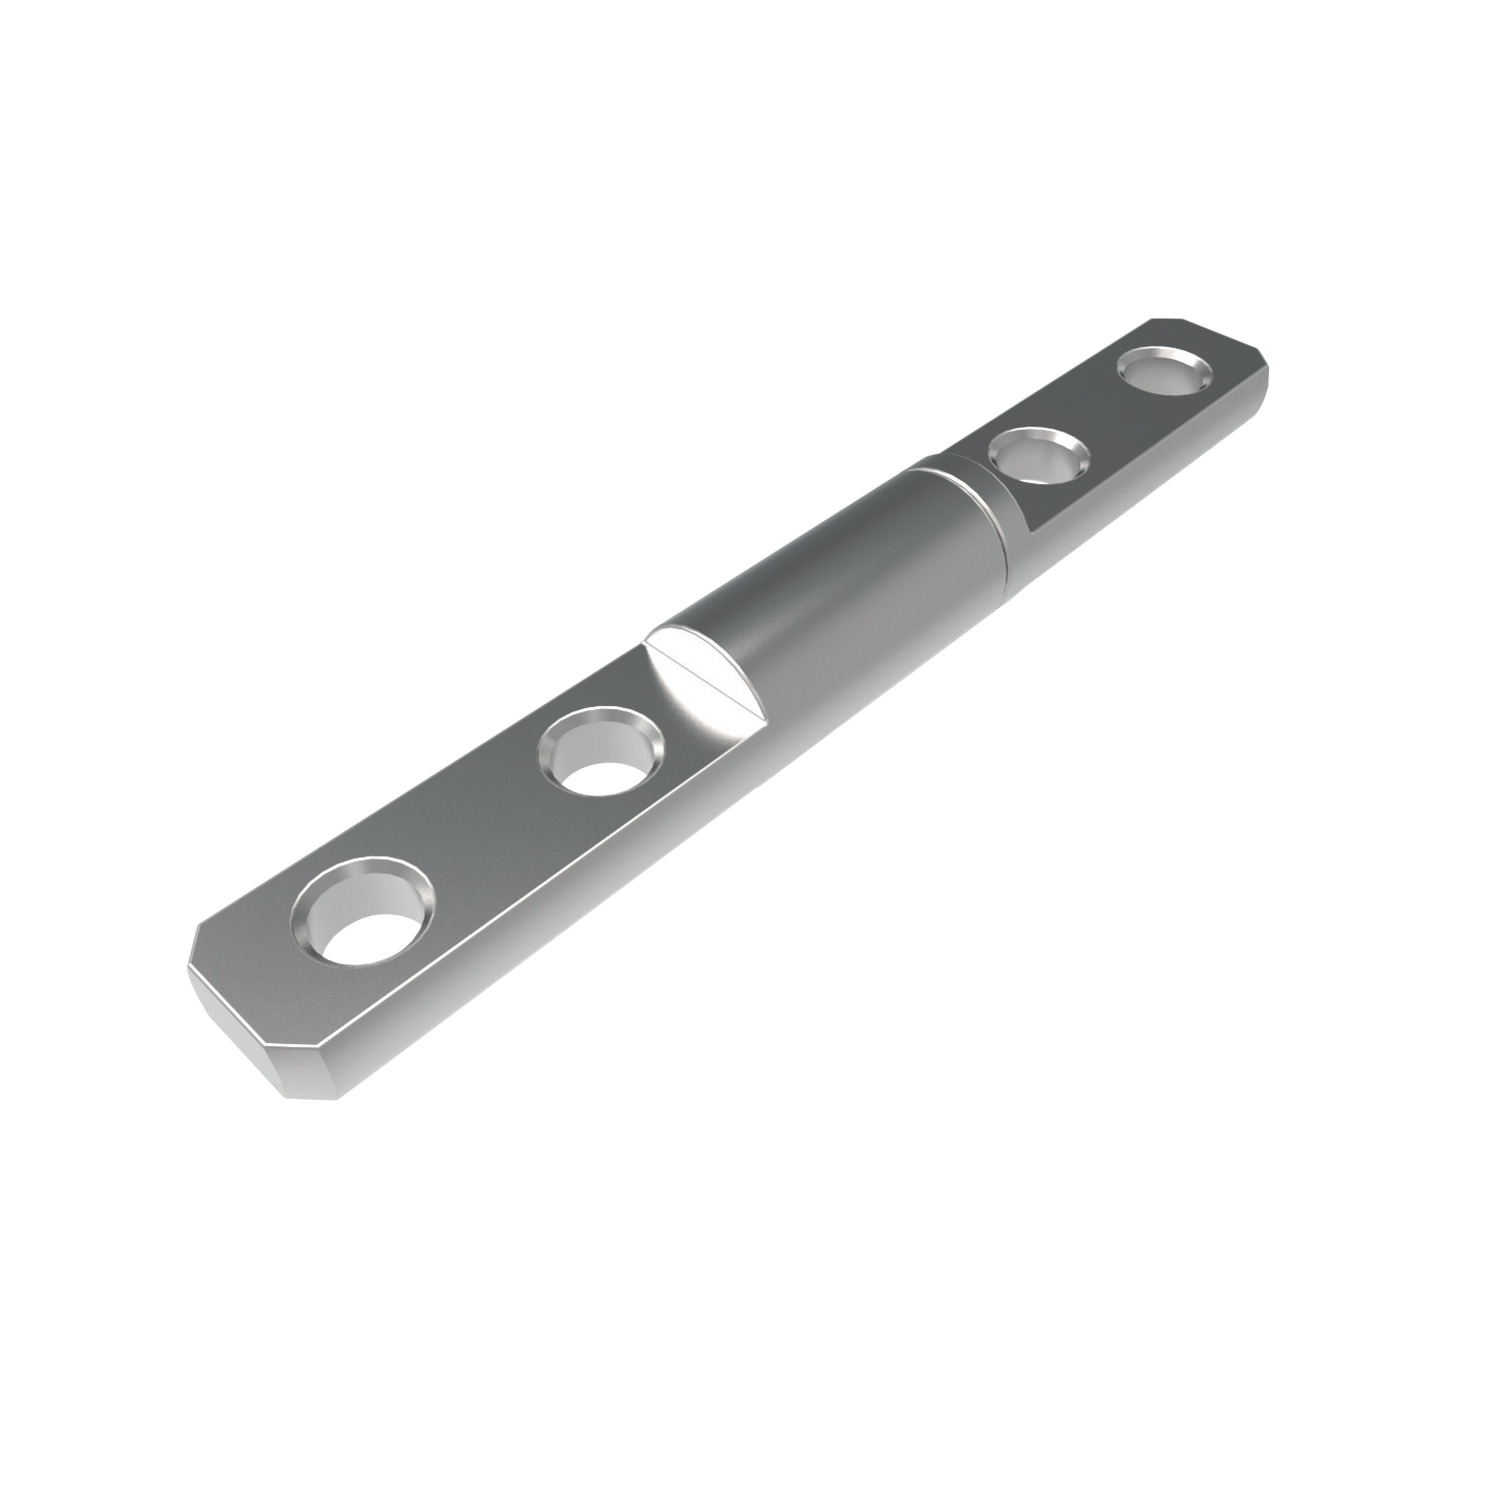 Friction Hinges Symmertic torque friction hinges with a torque of 0,05 to 3,80 Nm.